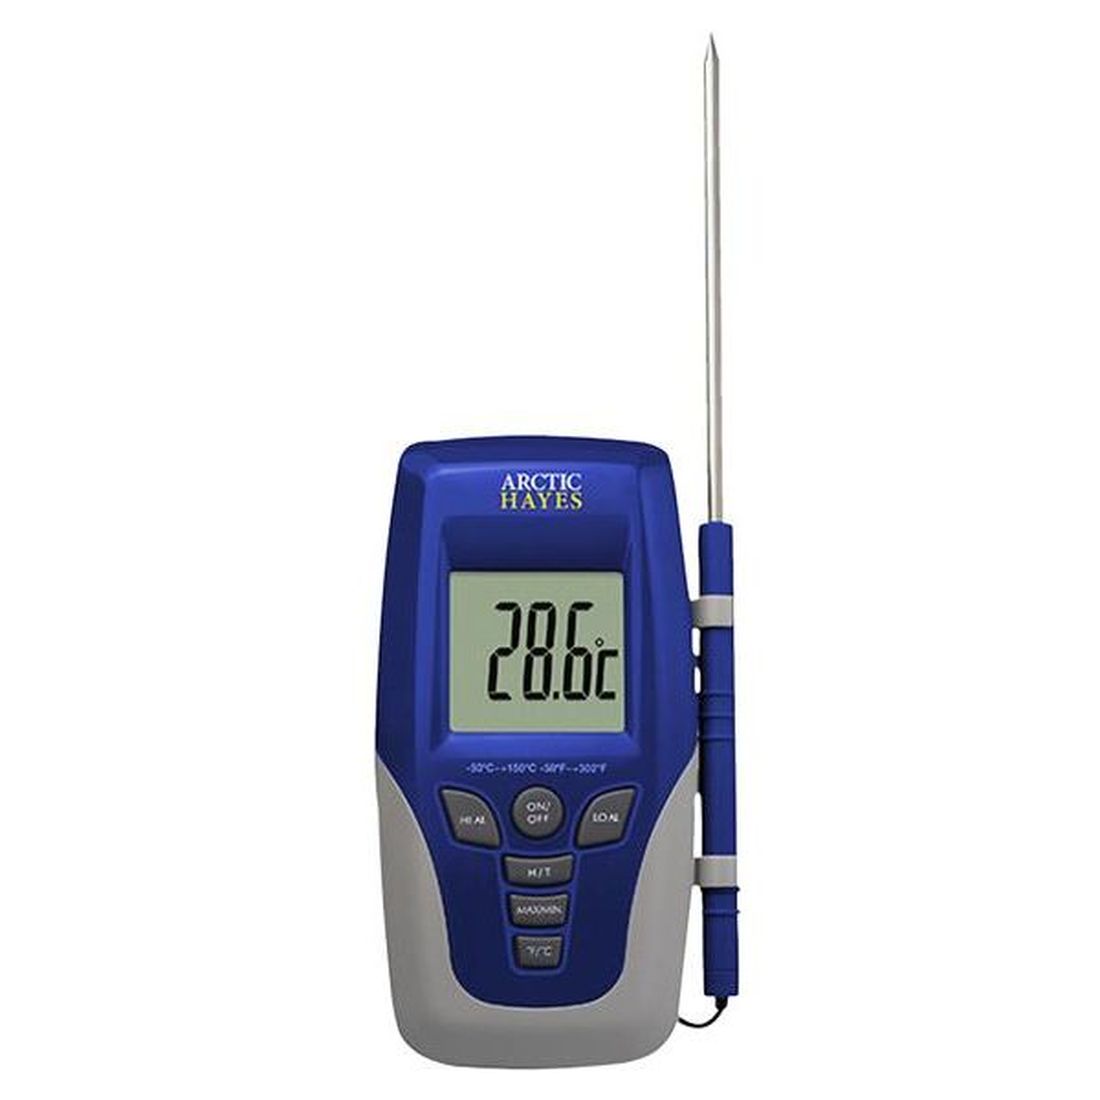 Arctic Hayes Compact Digital Thermometer       